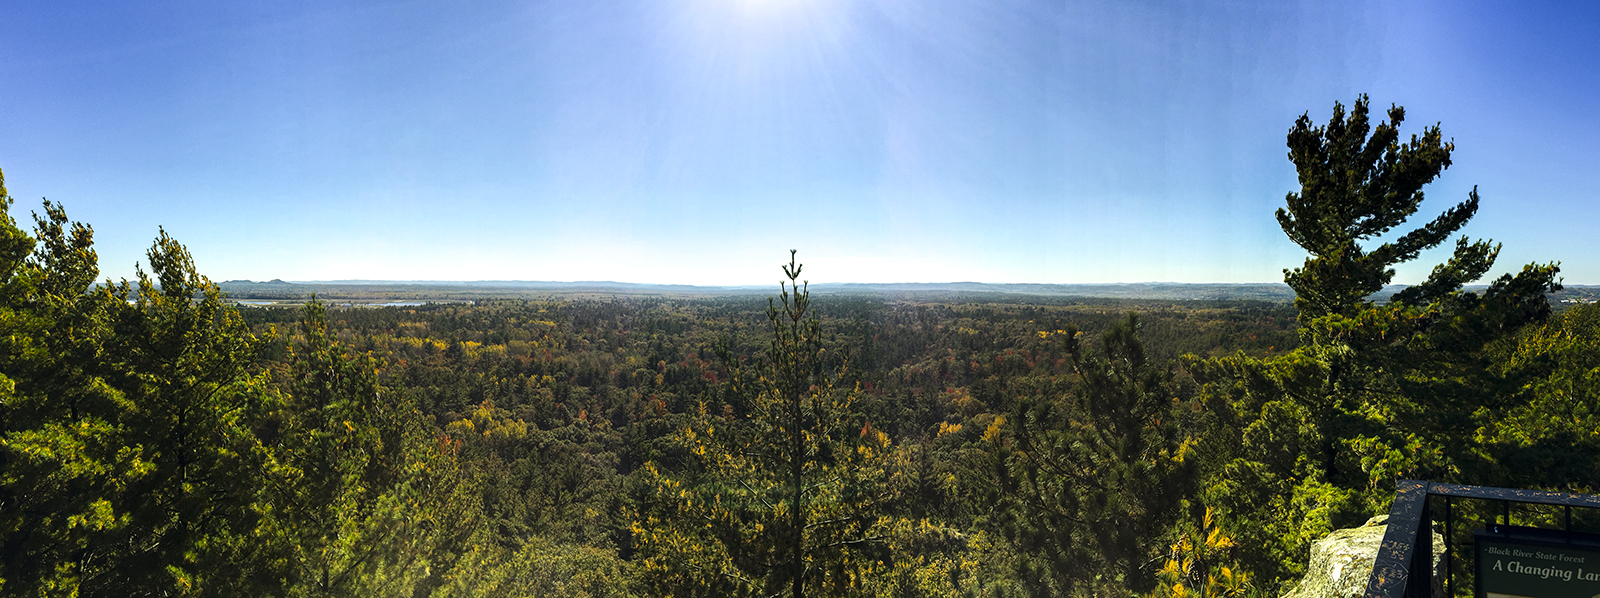 View from the Castle Mound Overlook